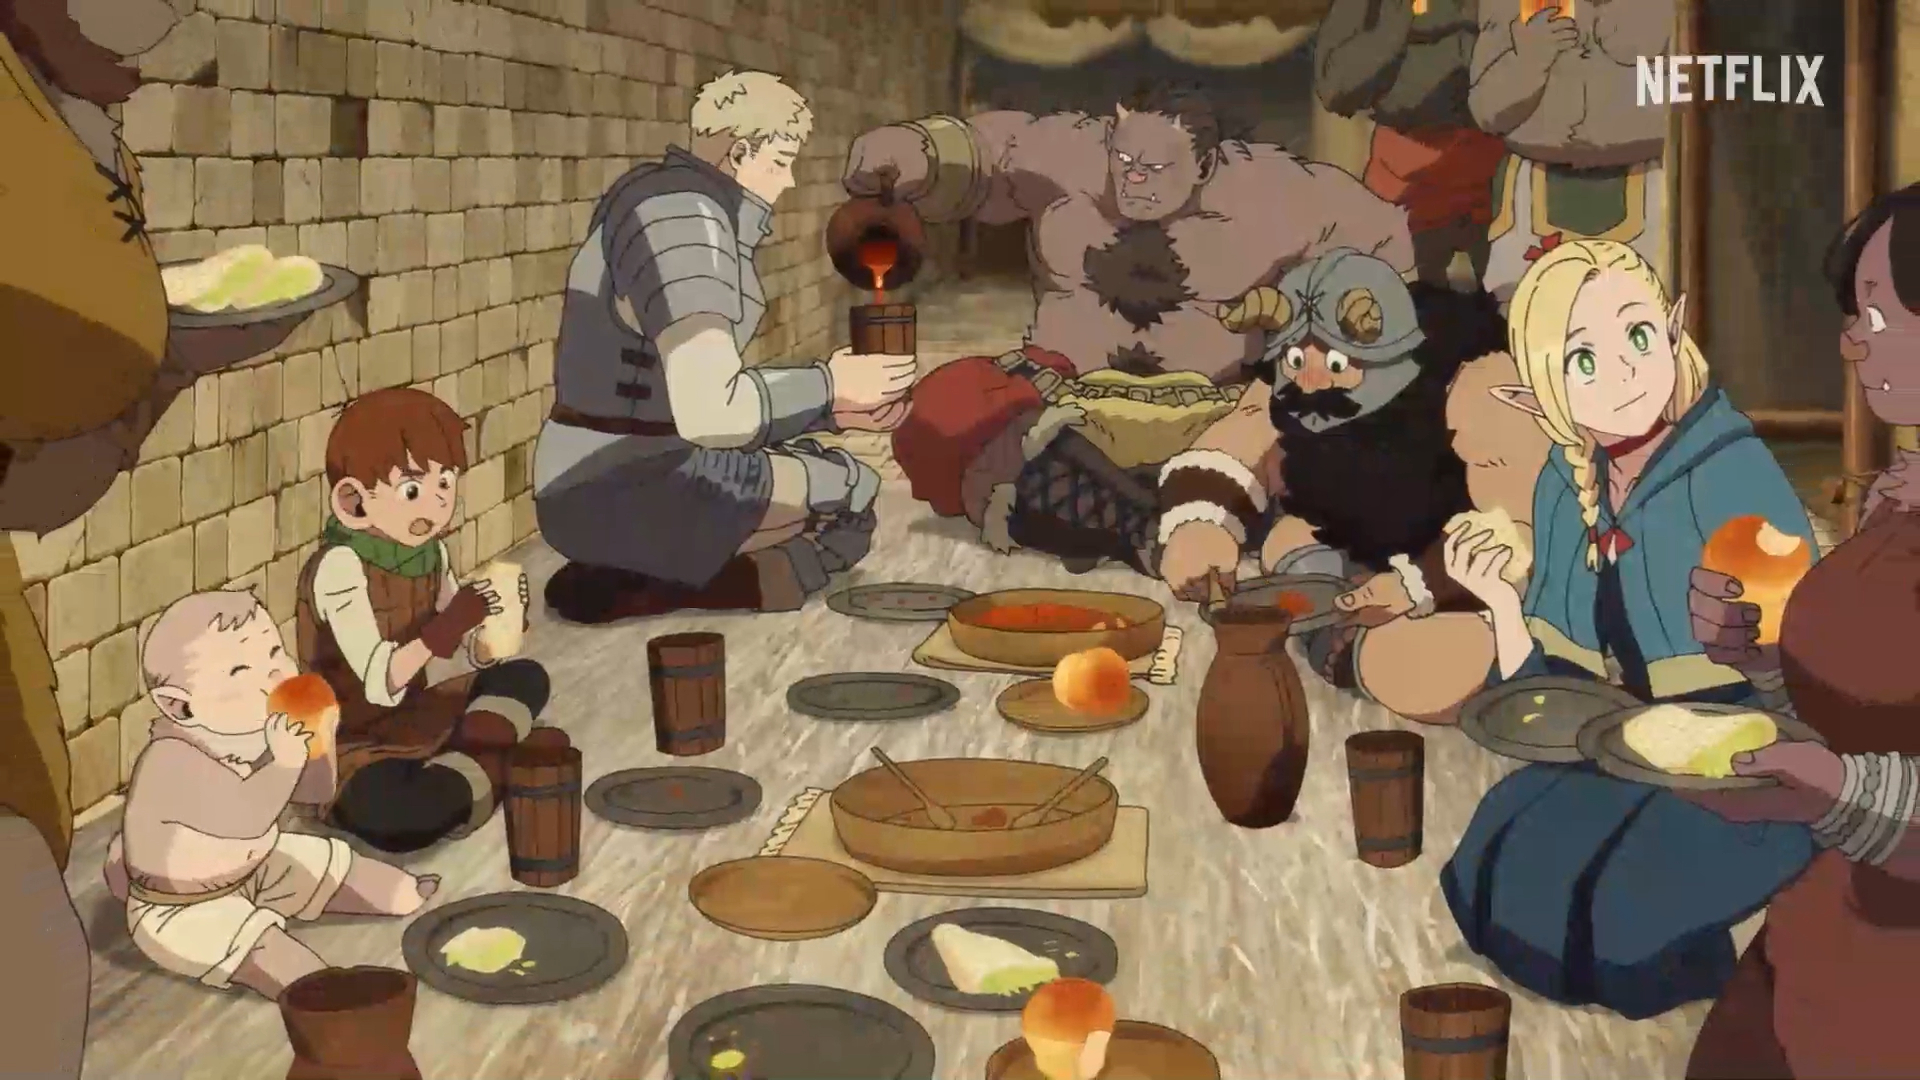 Where to watch Delicious in Dungeon dub legally